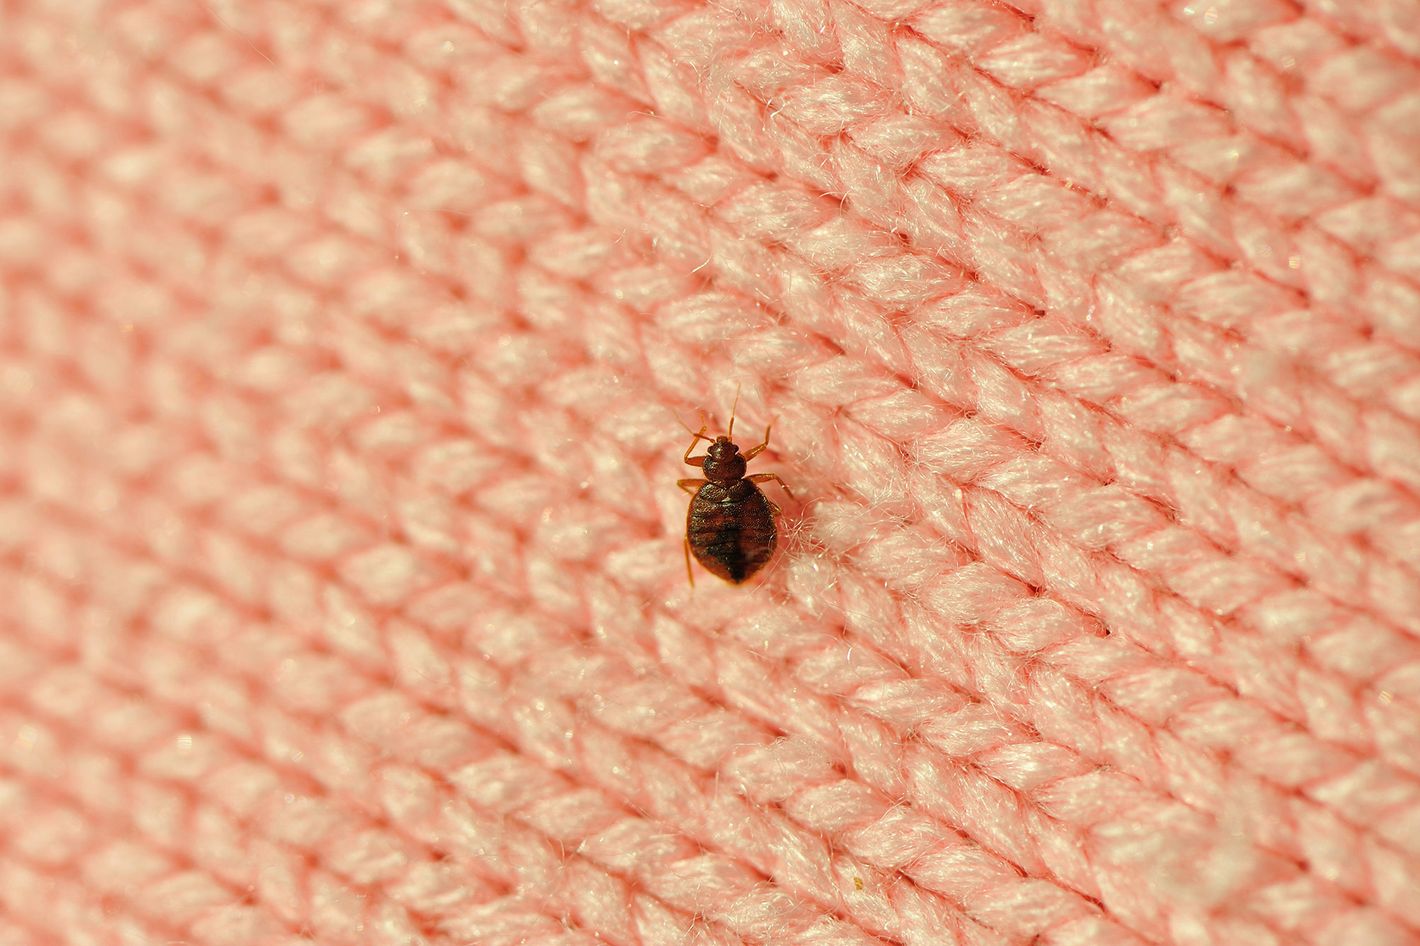 Bedbugs bite: Bedbugs are attracted to dirty clothes